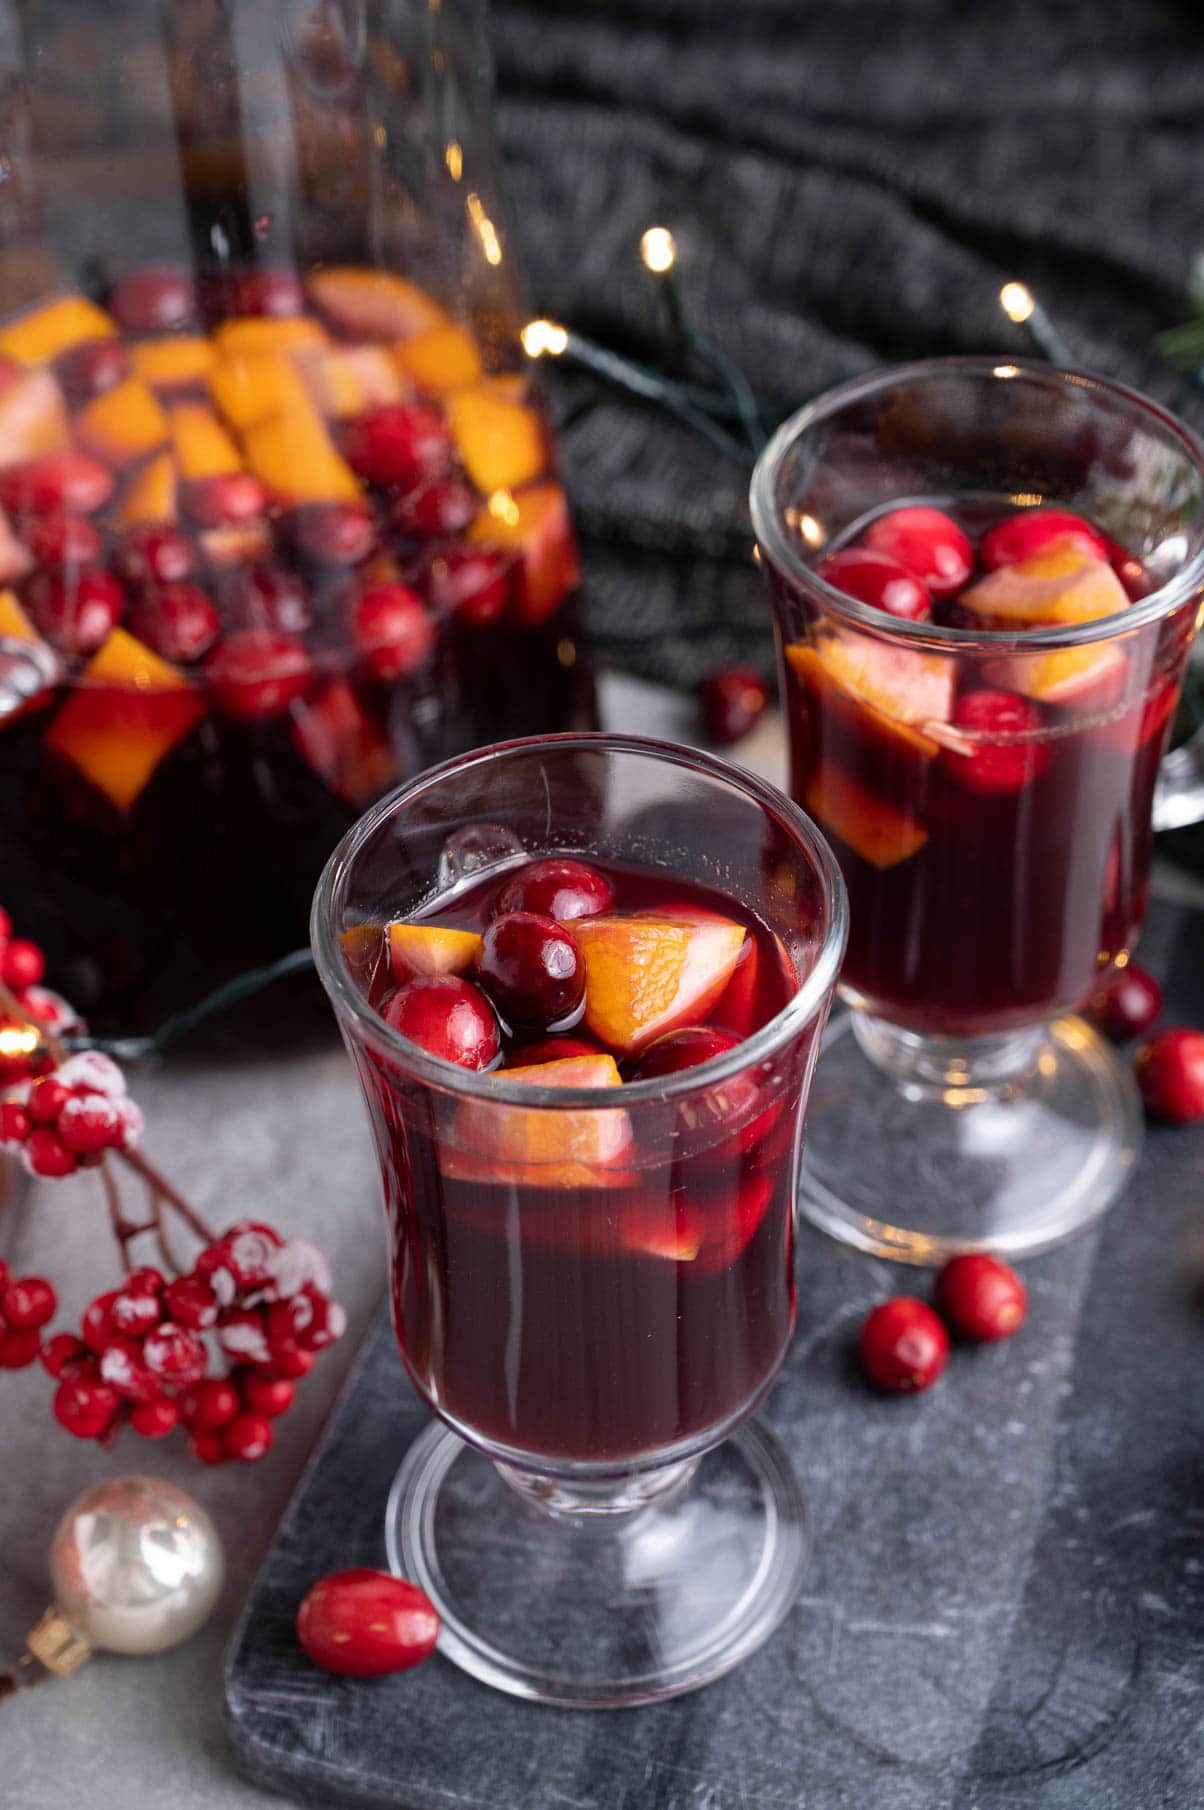 Two glasses with Christmas sangria on a black board. A pitcher and Christmas lights in the background.